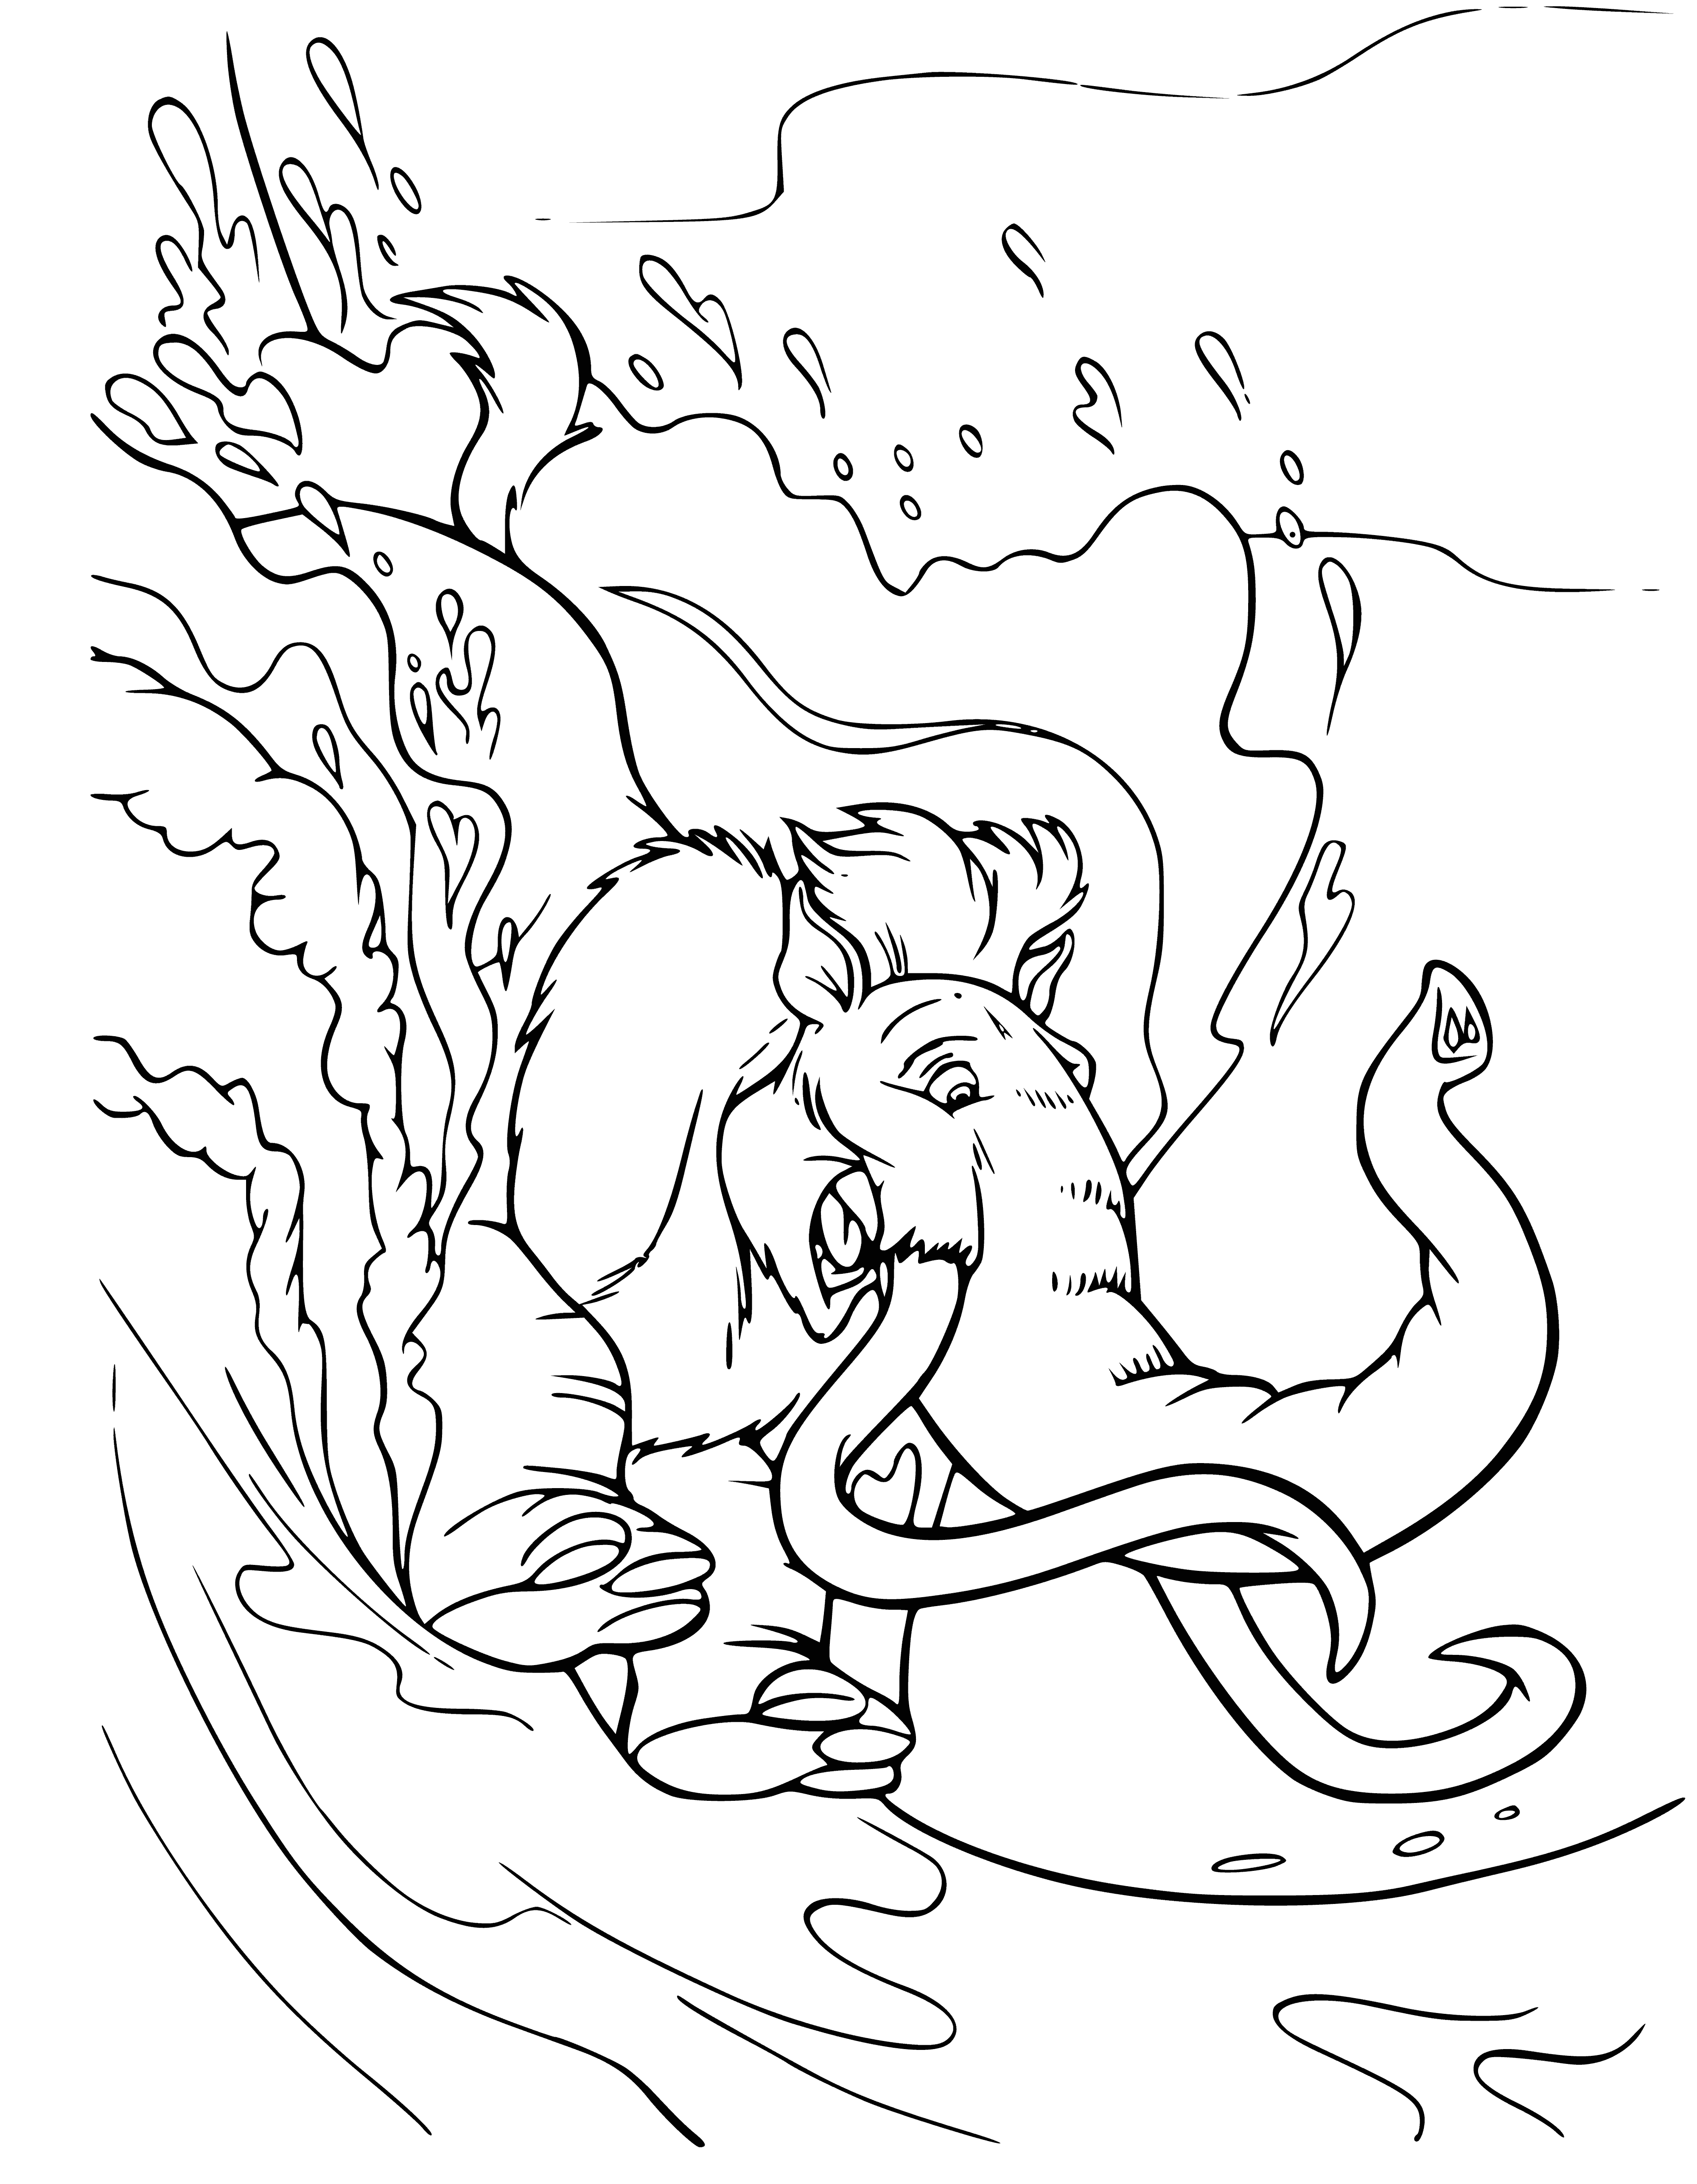 coloring page: Manny the Woolly Mammoth takes a stroll in crystal-clear water, surrounded by fish & other creatures.